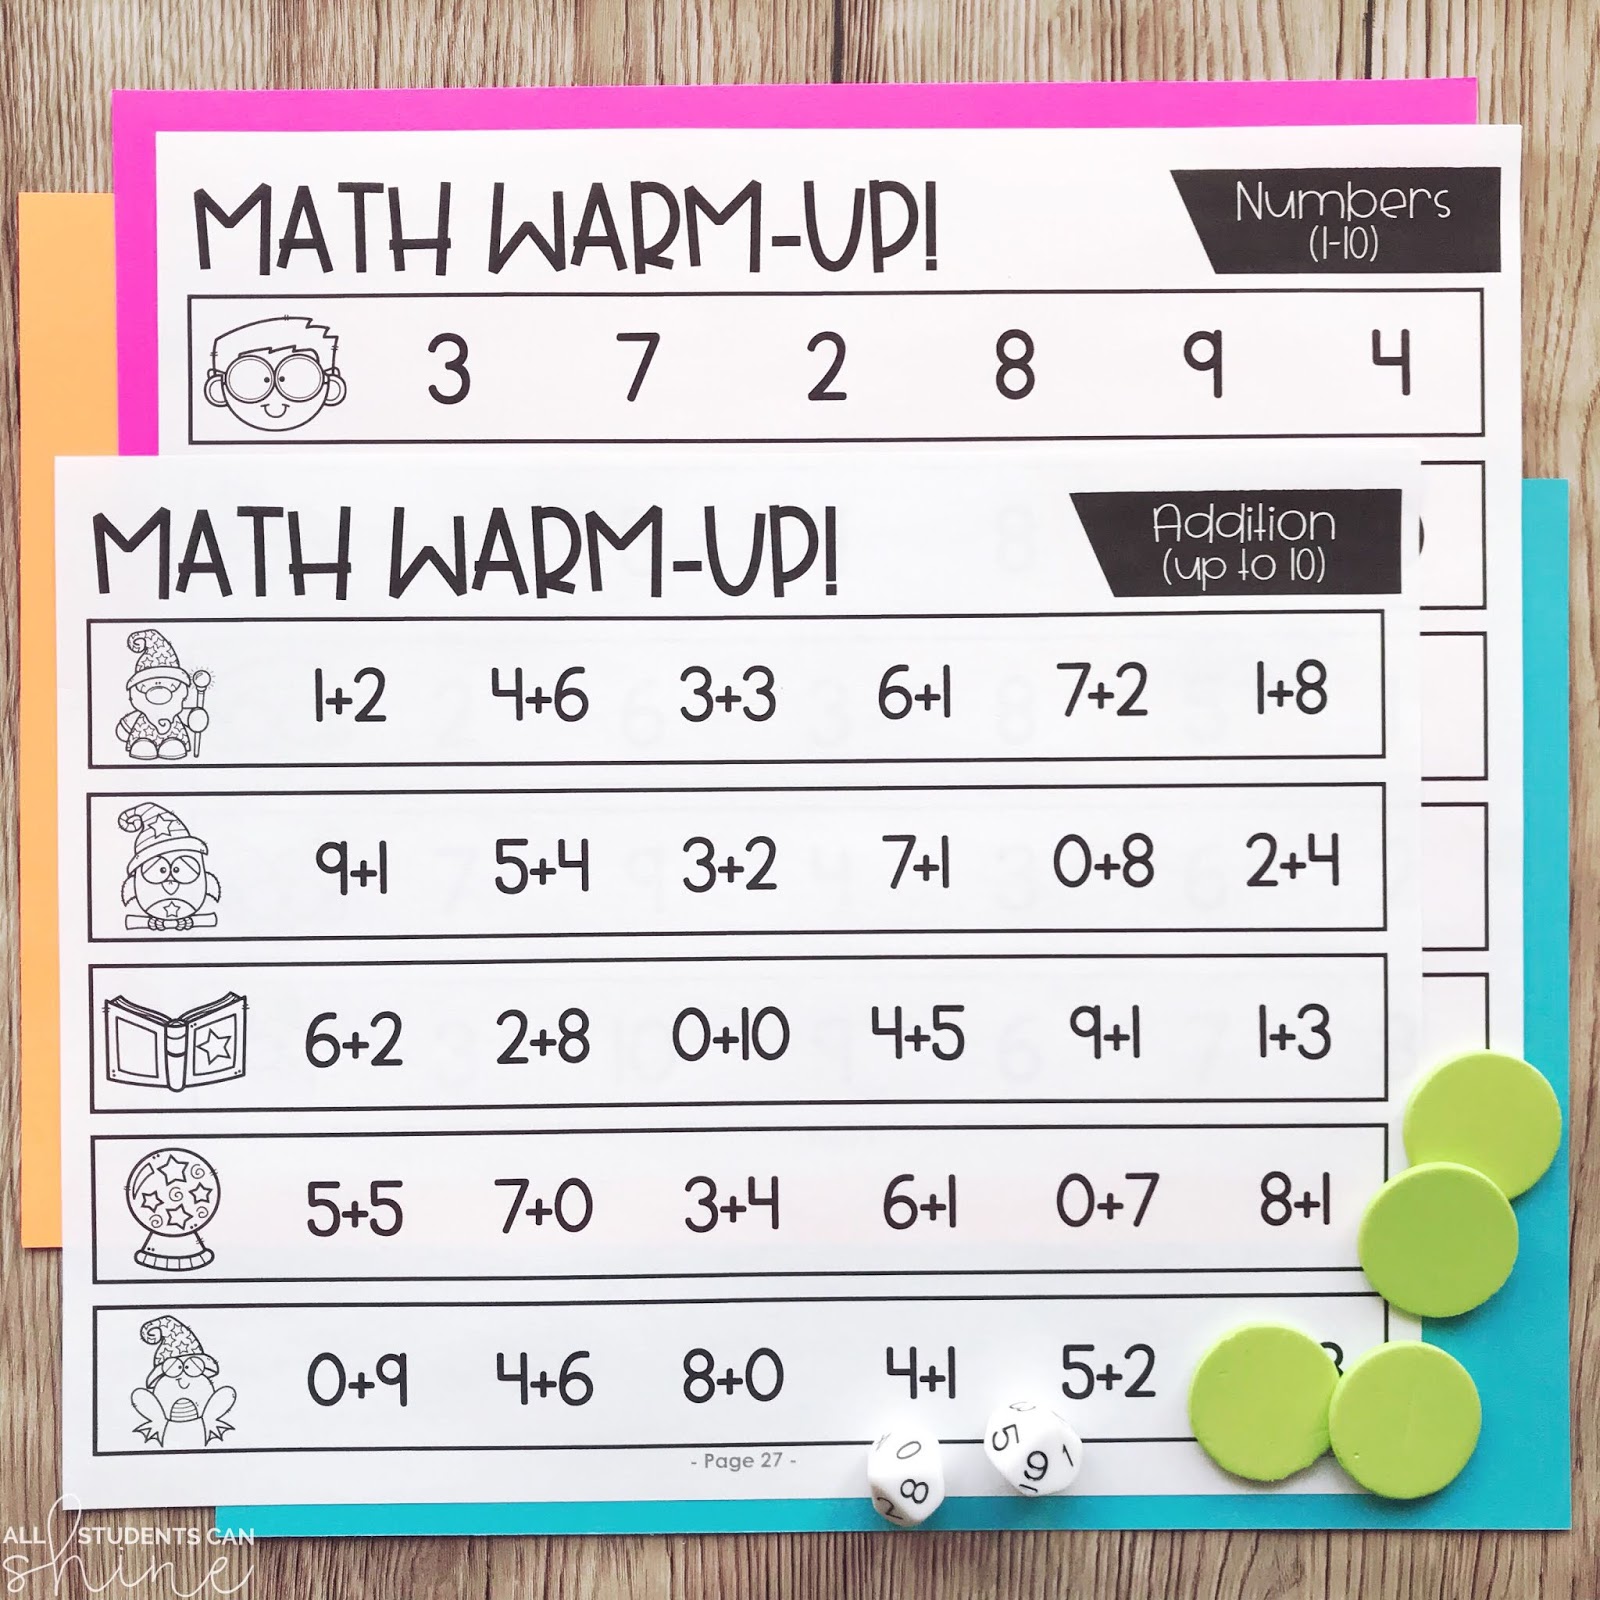 daily-math-warm-ups-for-first-grade-february-daily-math-february-classroom-activities-math